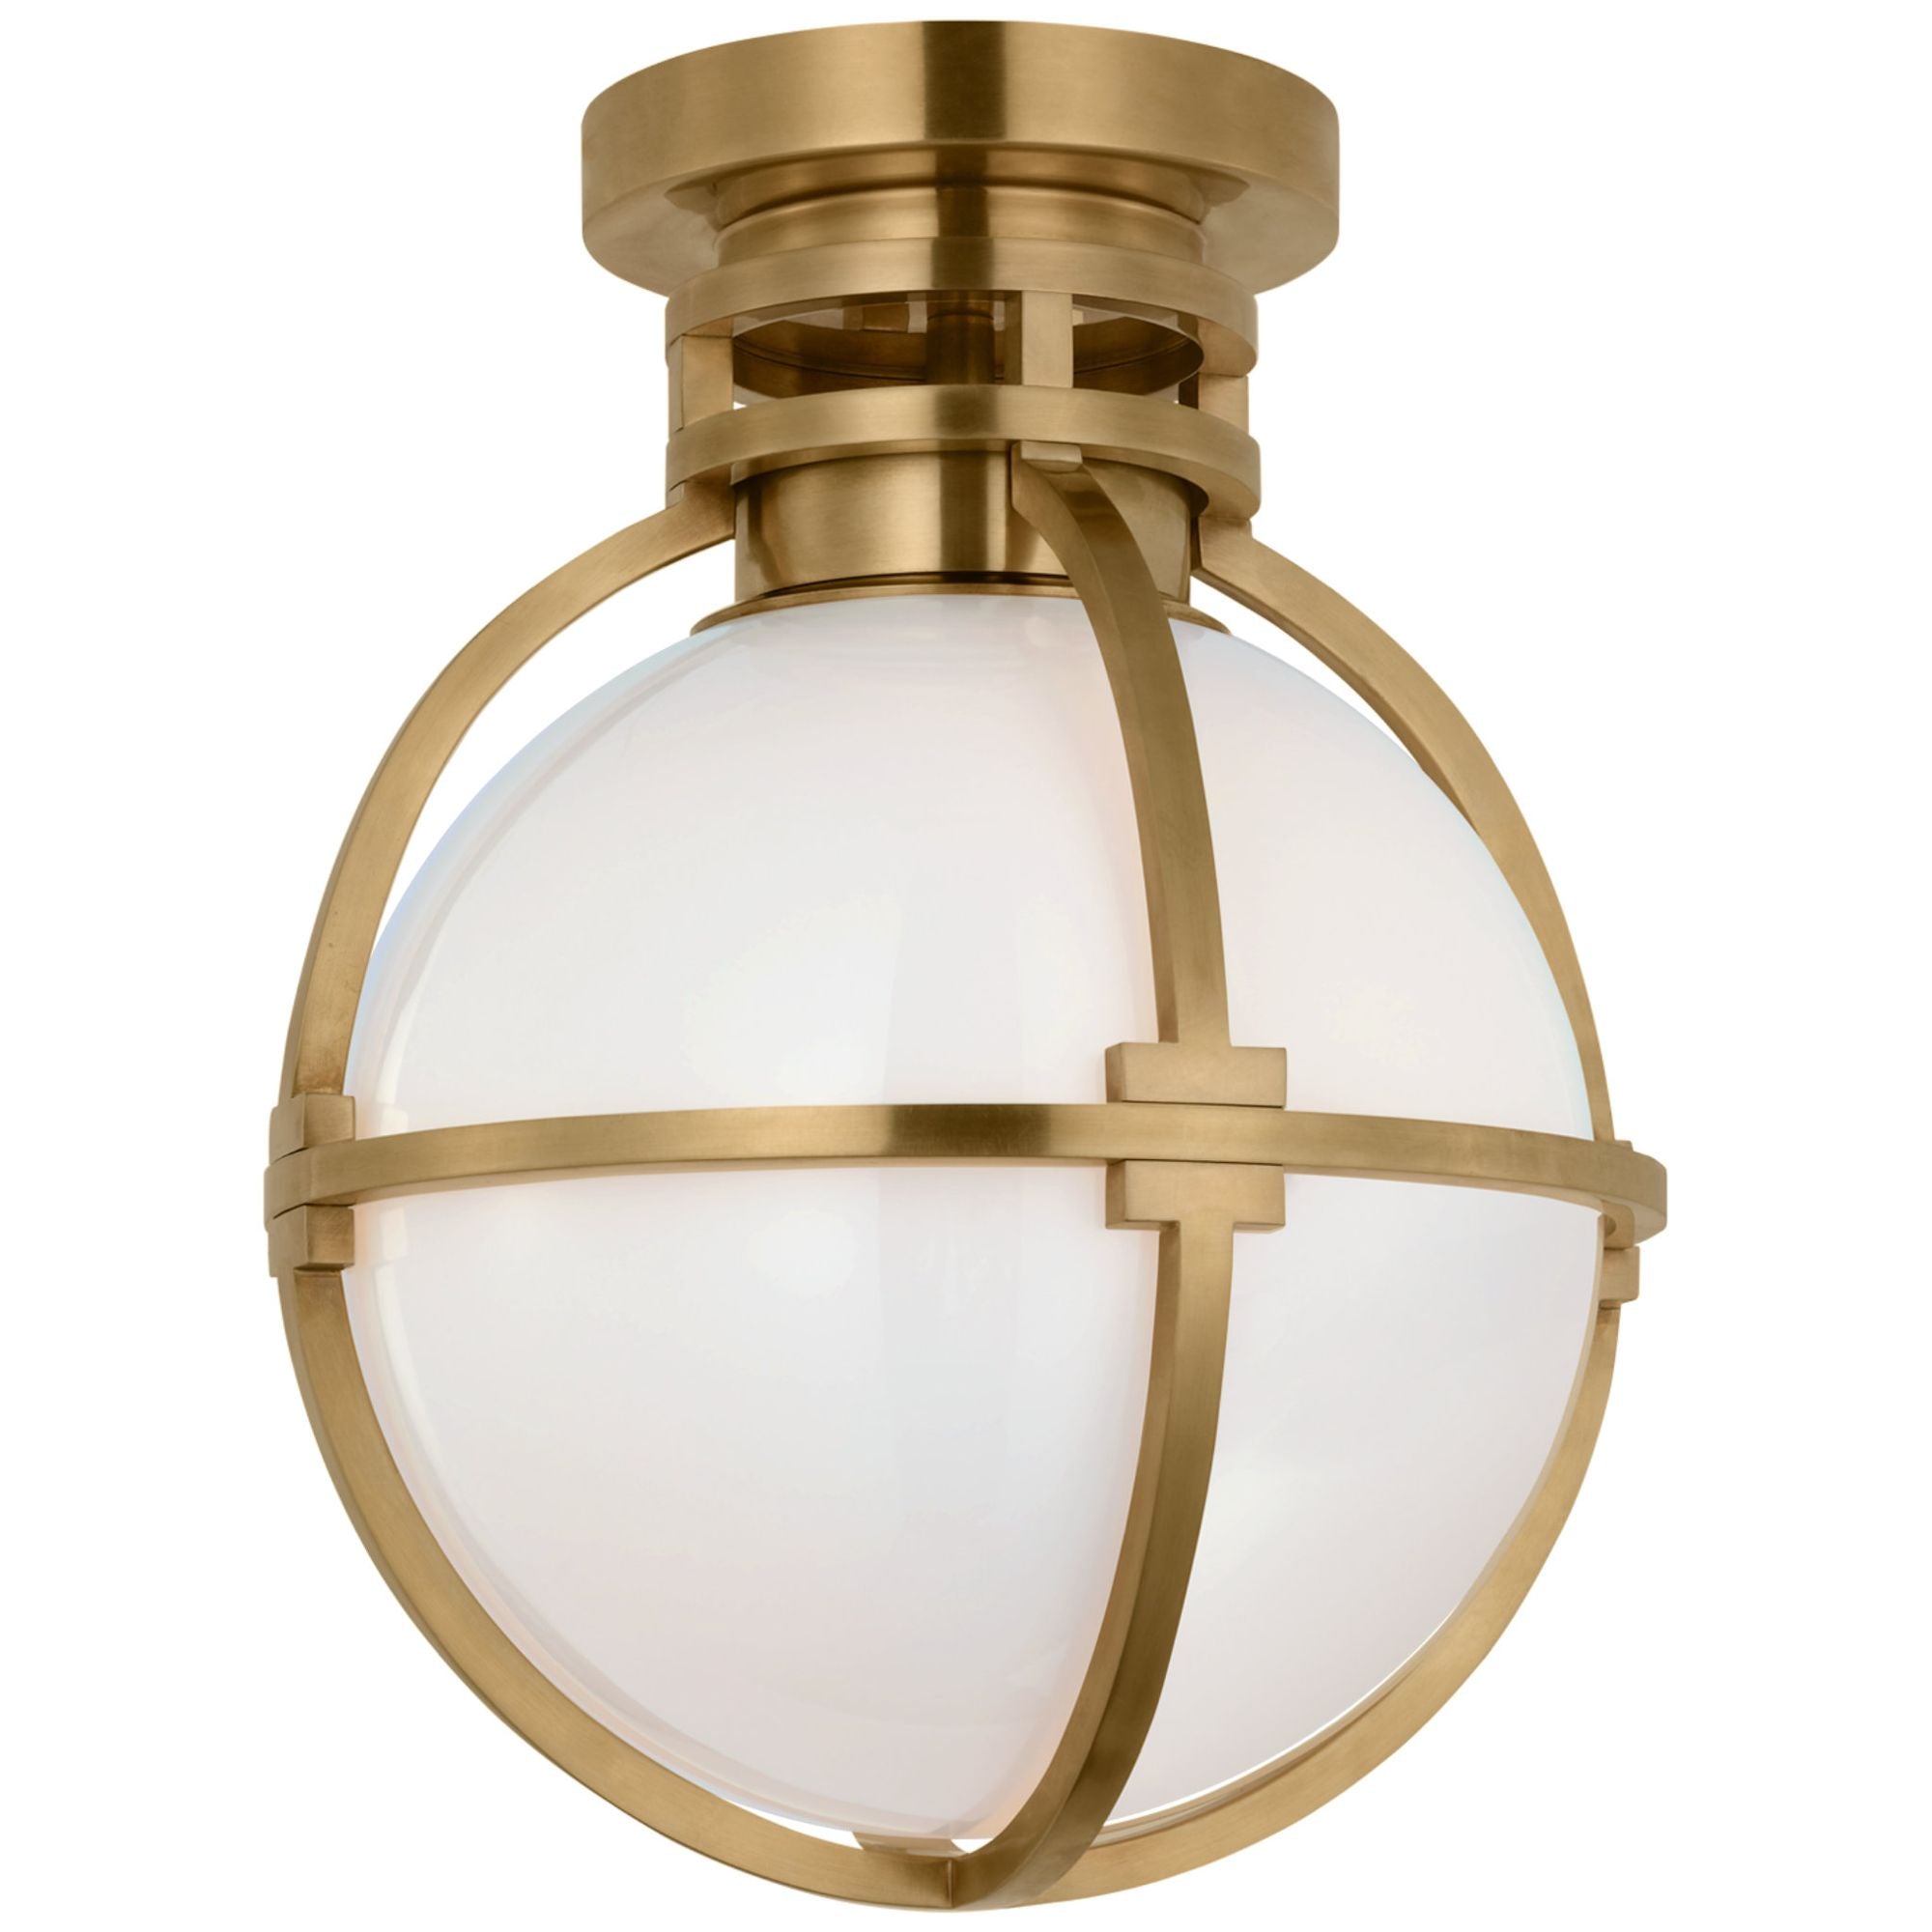 Chapman & Myers Gracie 10" Captured Globe Flush Mount in Antique-Burnished Brass with White Glass